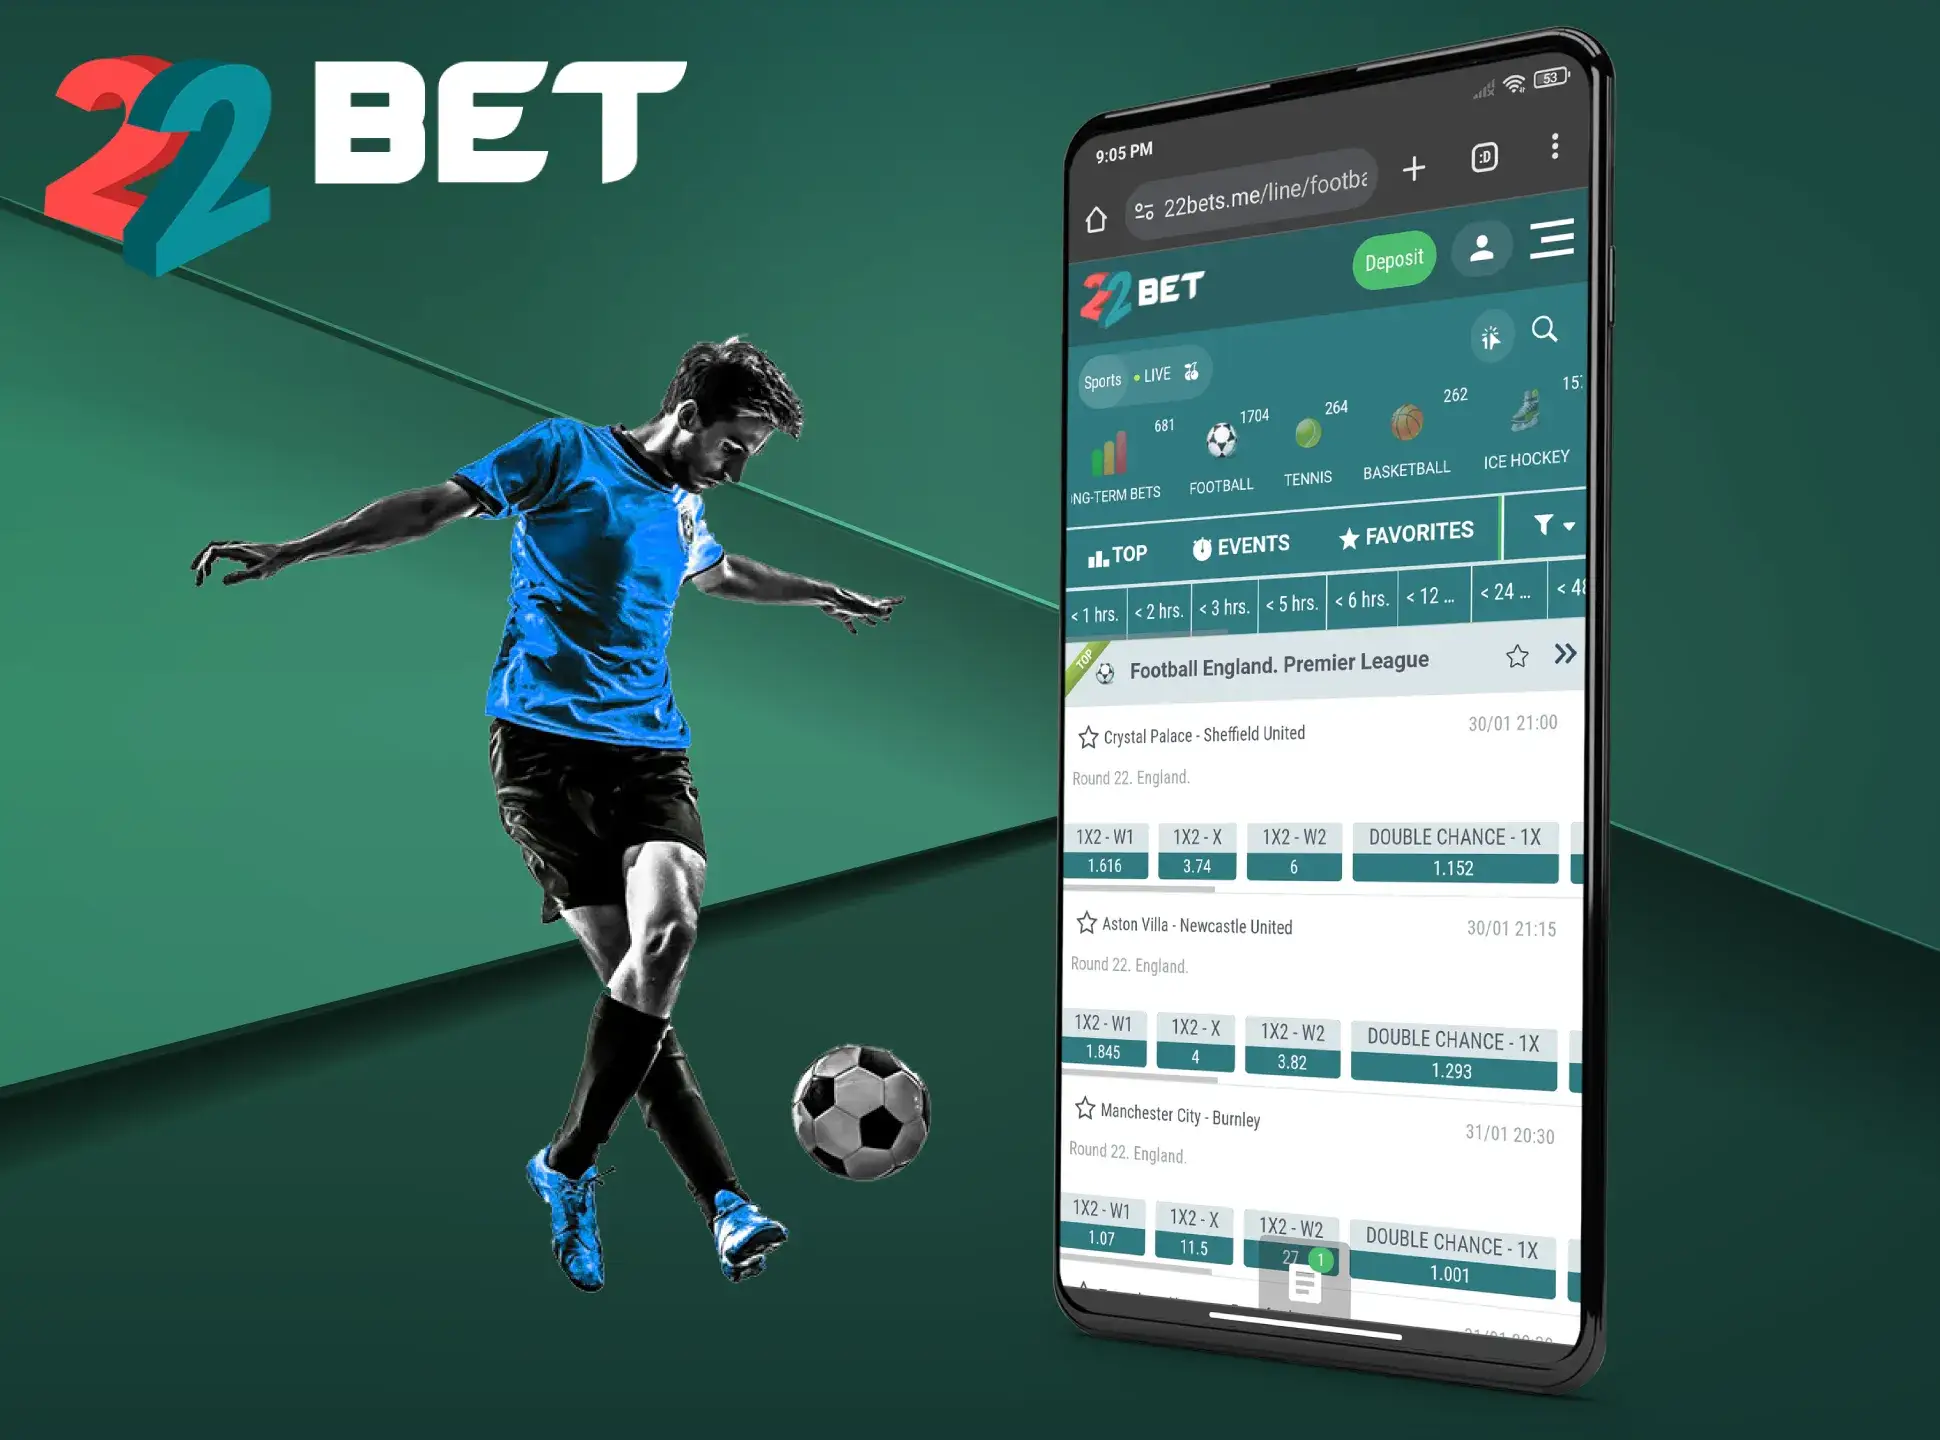 Bet on football matches in the 22Bet app for real money.